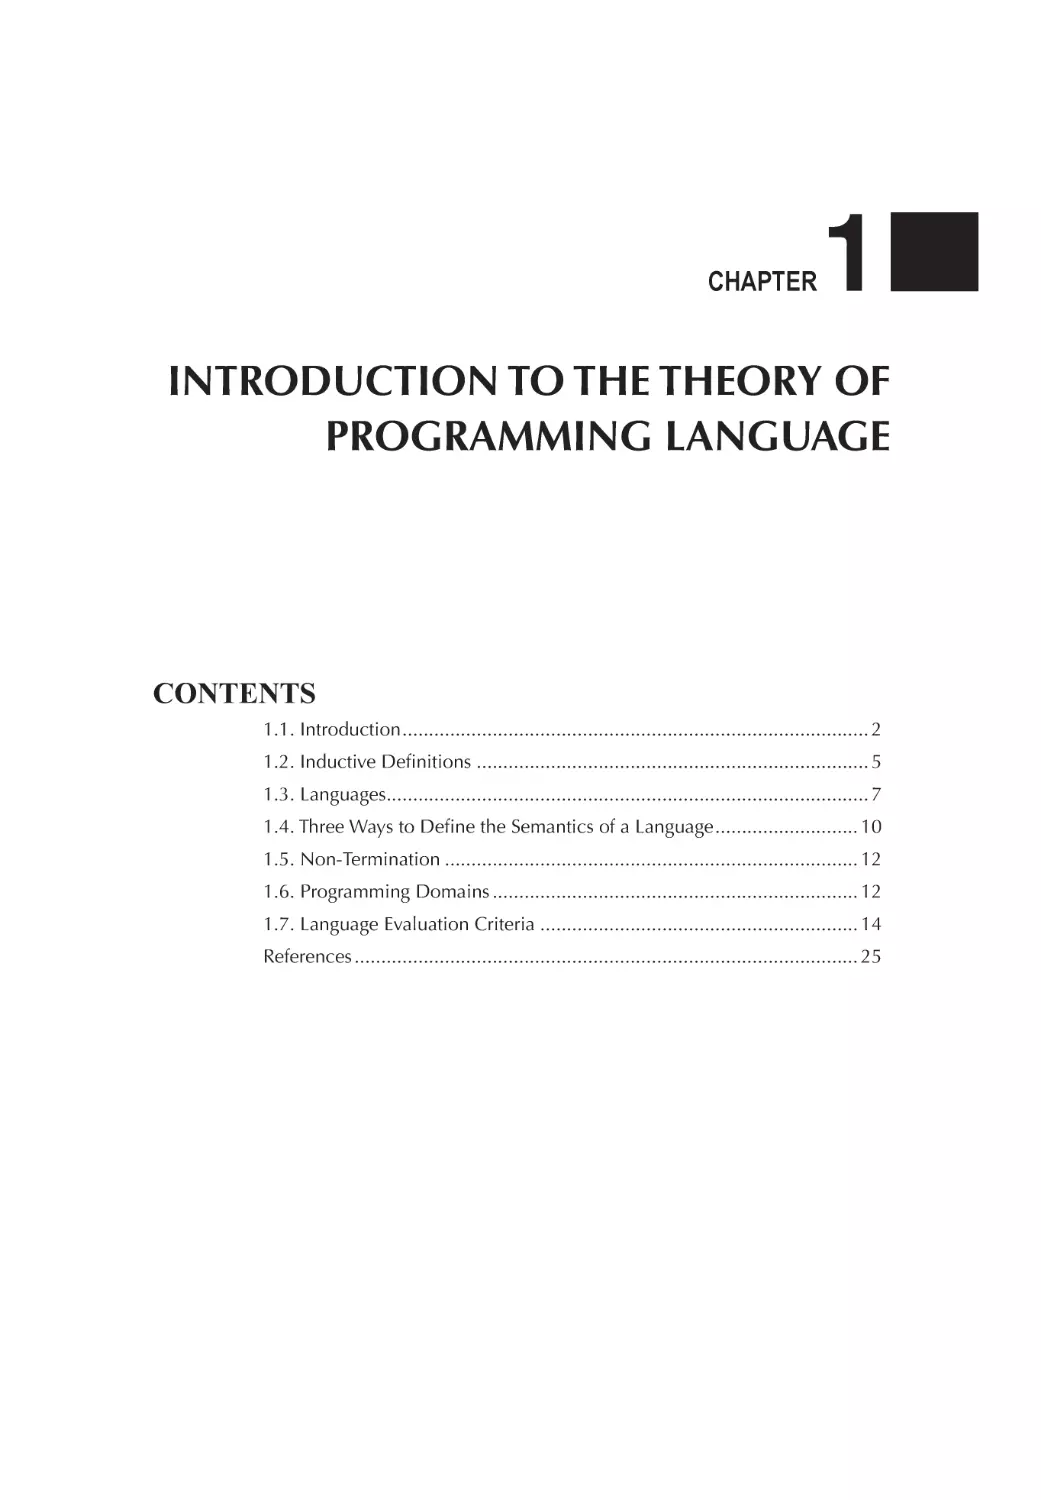 Chapter 1 Introduction to the Theory of Programming Language